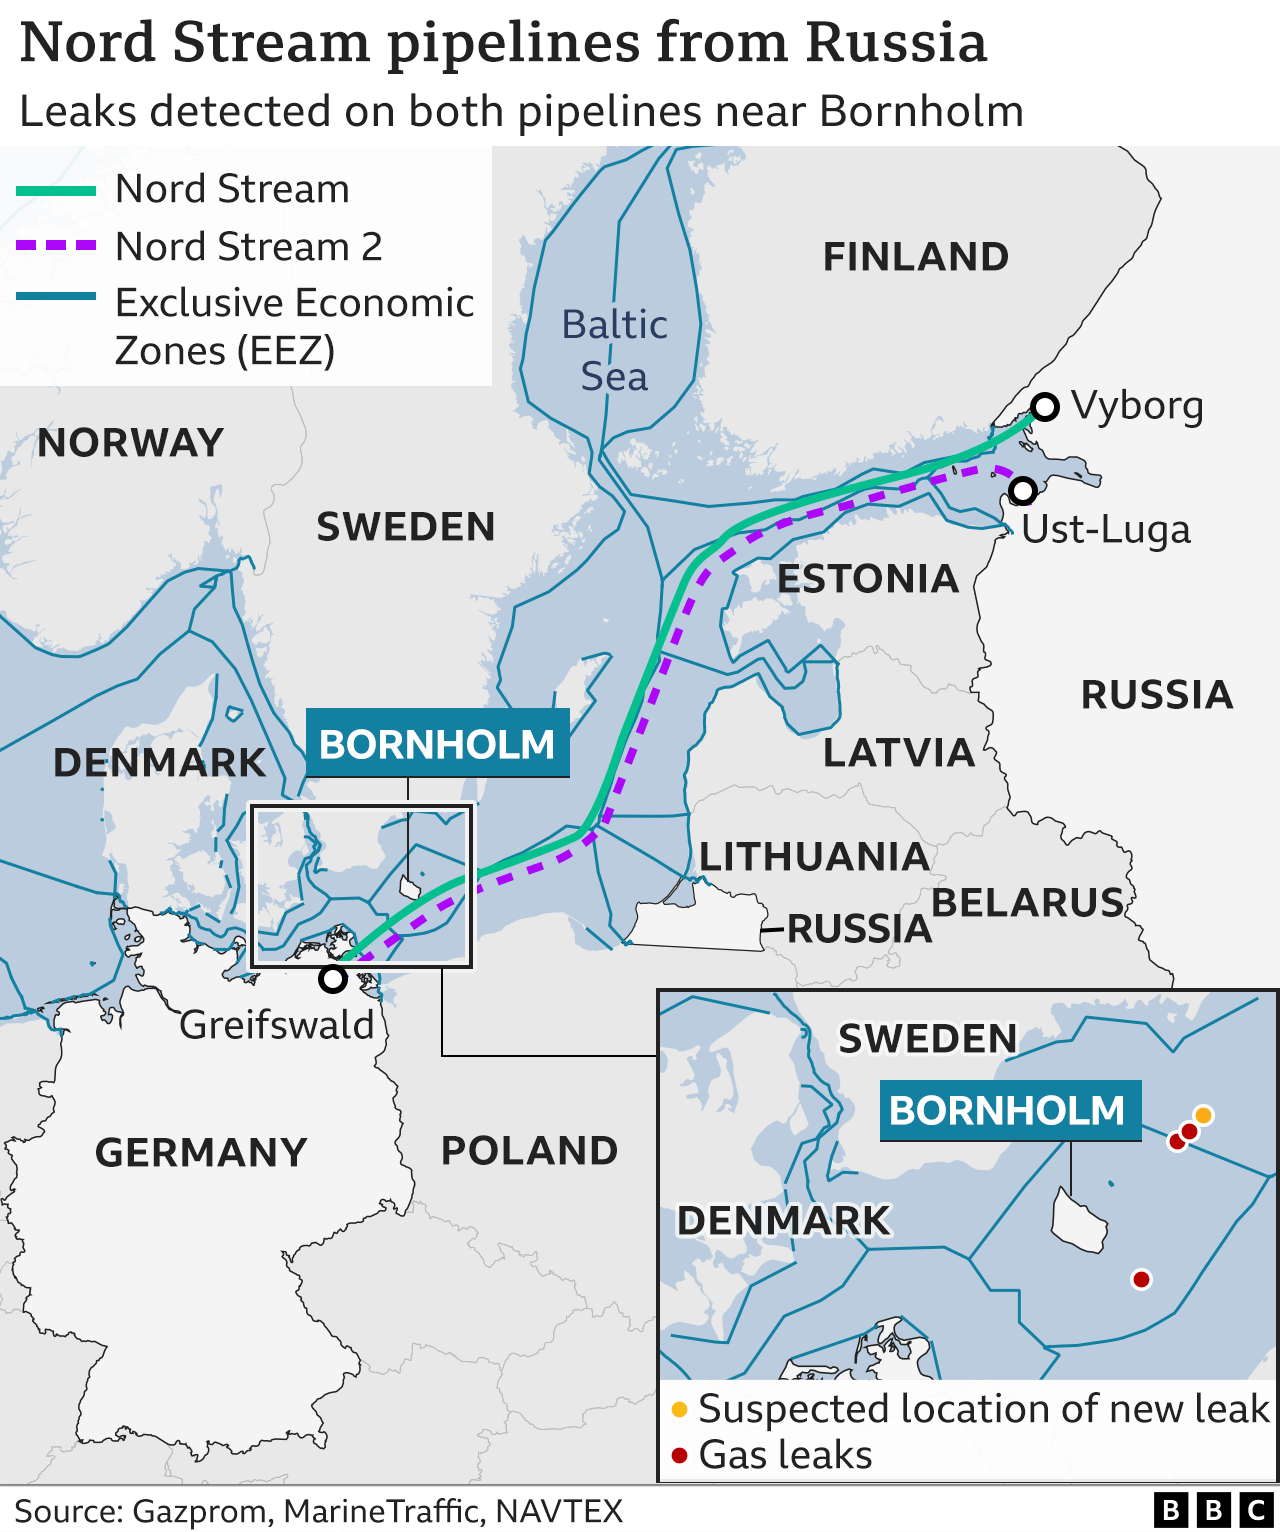 Map shBbc.co.uk/news/world-europe-60131520owing the route of the Nord Stream pipelines between Russia and Germany as well as the borders of the economic zones in the Baltic sea.